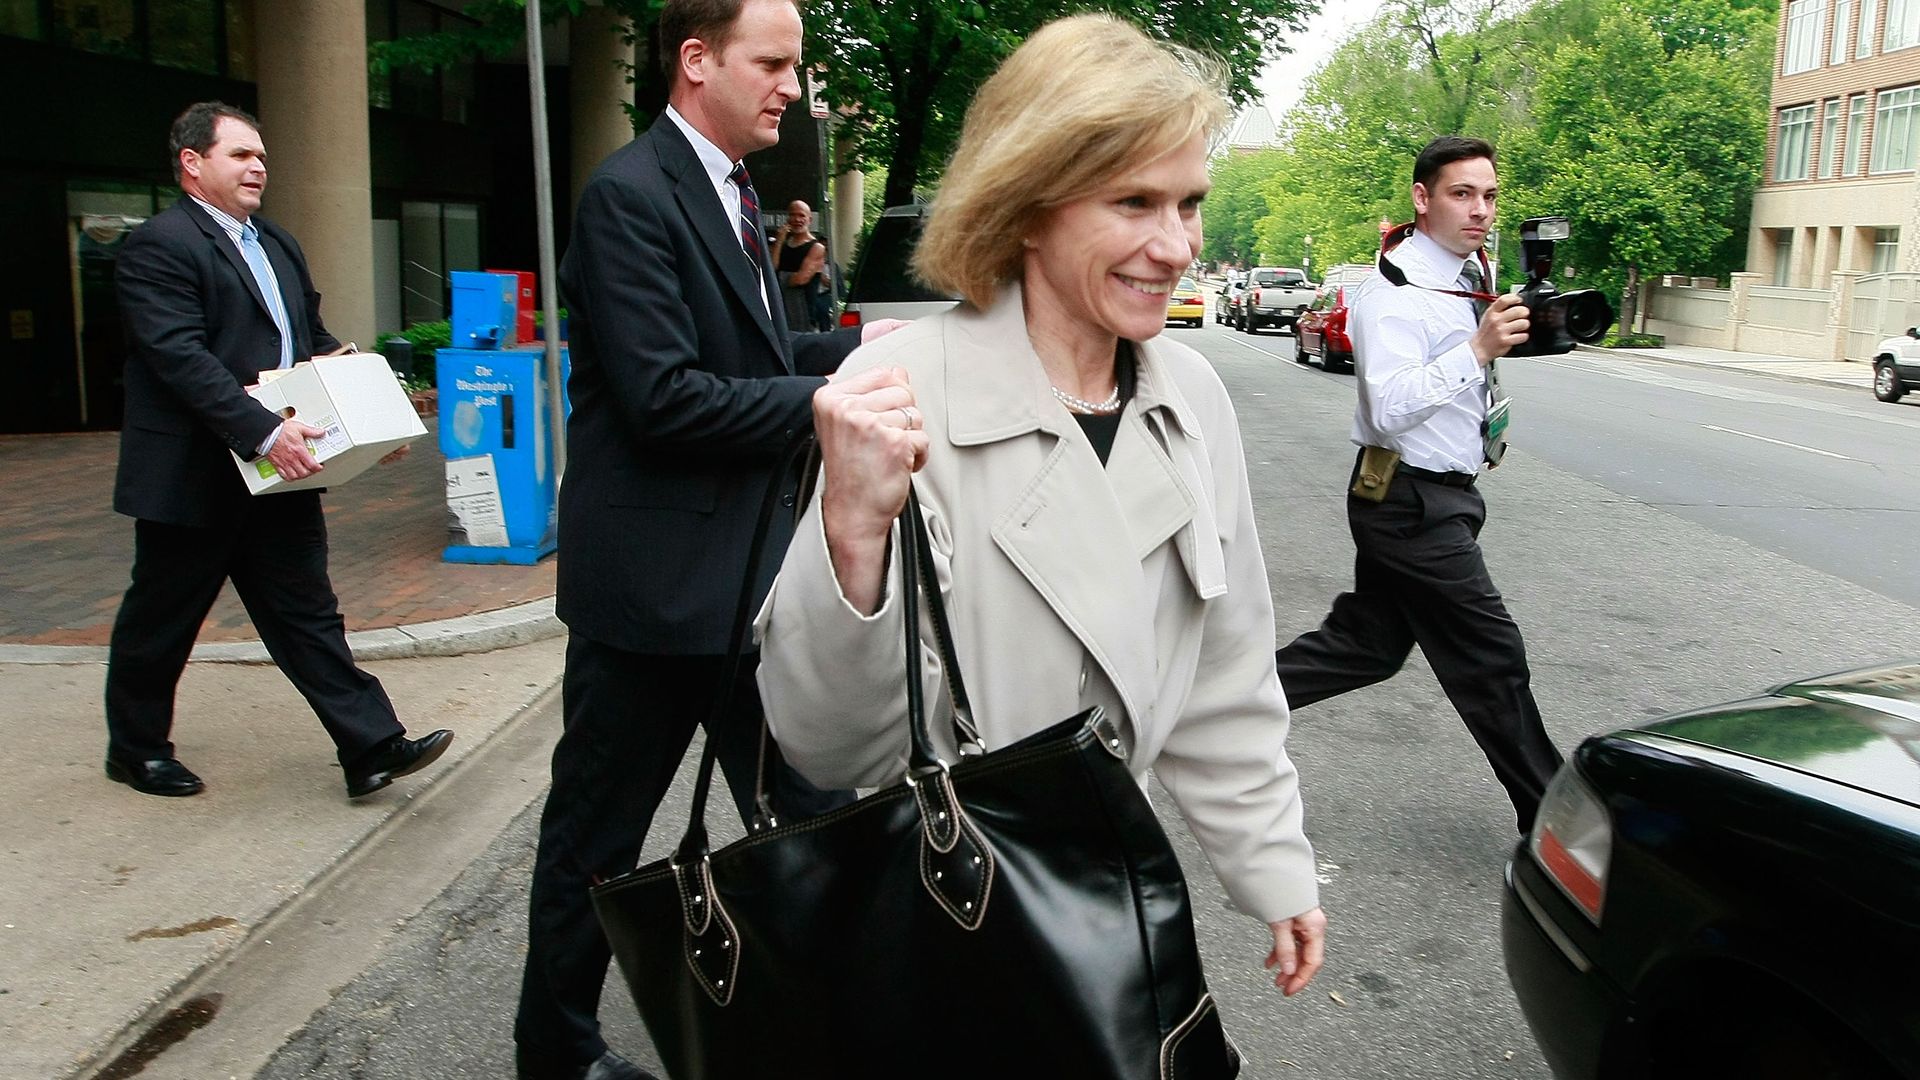 Connecticut prosecutor Nora Dannehy entering a taxi in 2009.